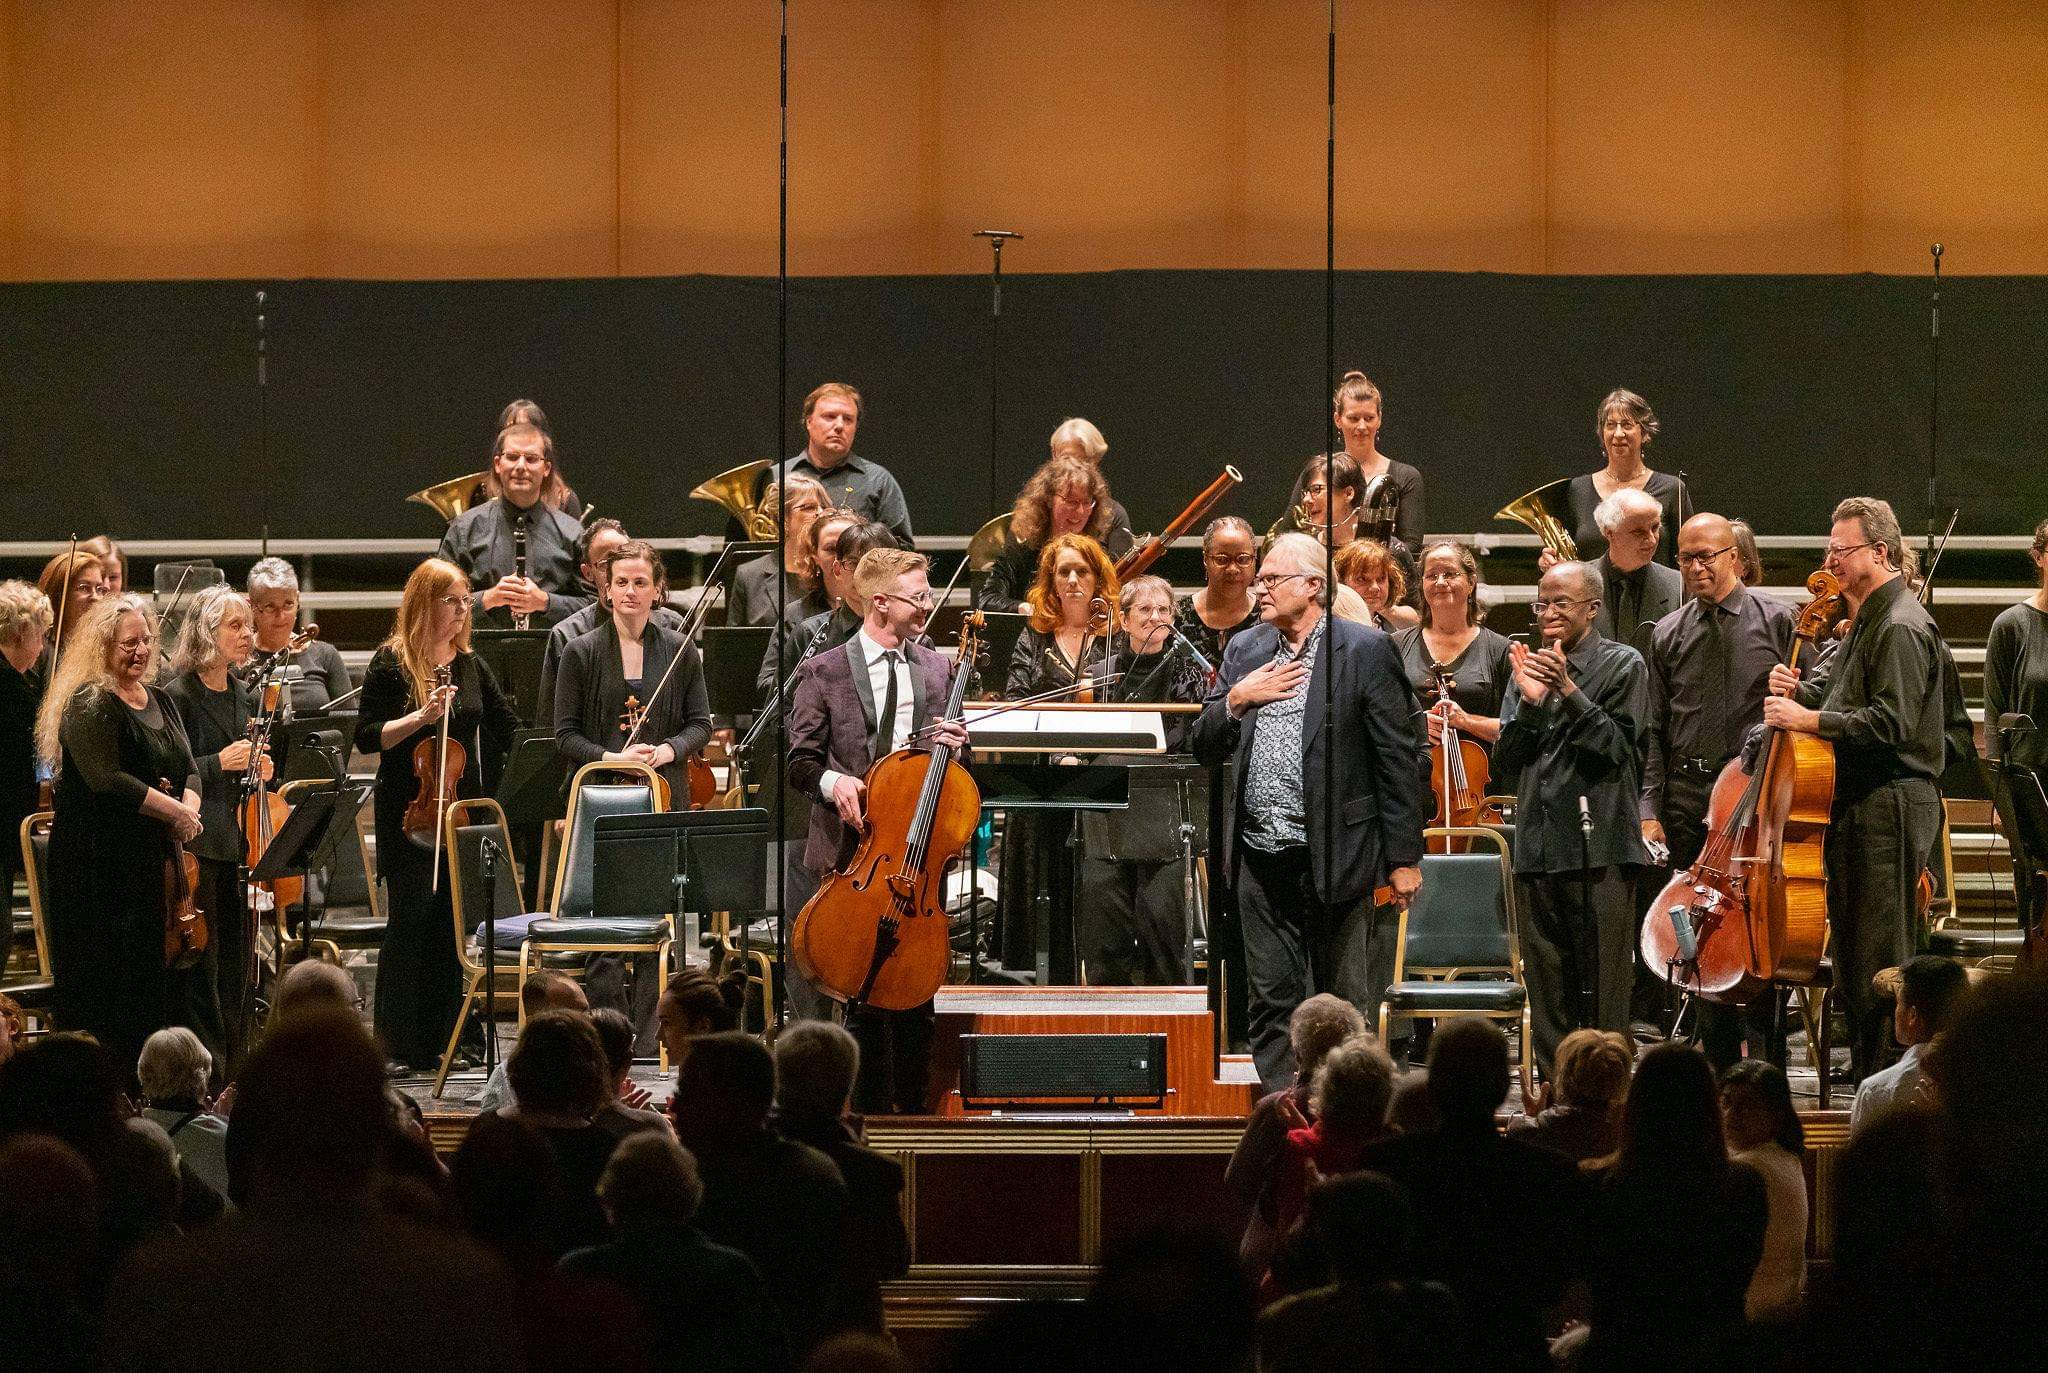 Ghost Ship Concerto for Cello and Orchestra performed by the Oakland Symphony